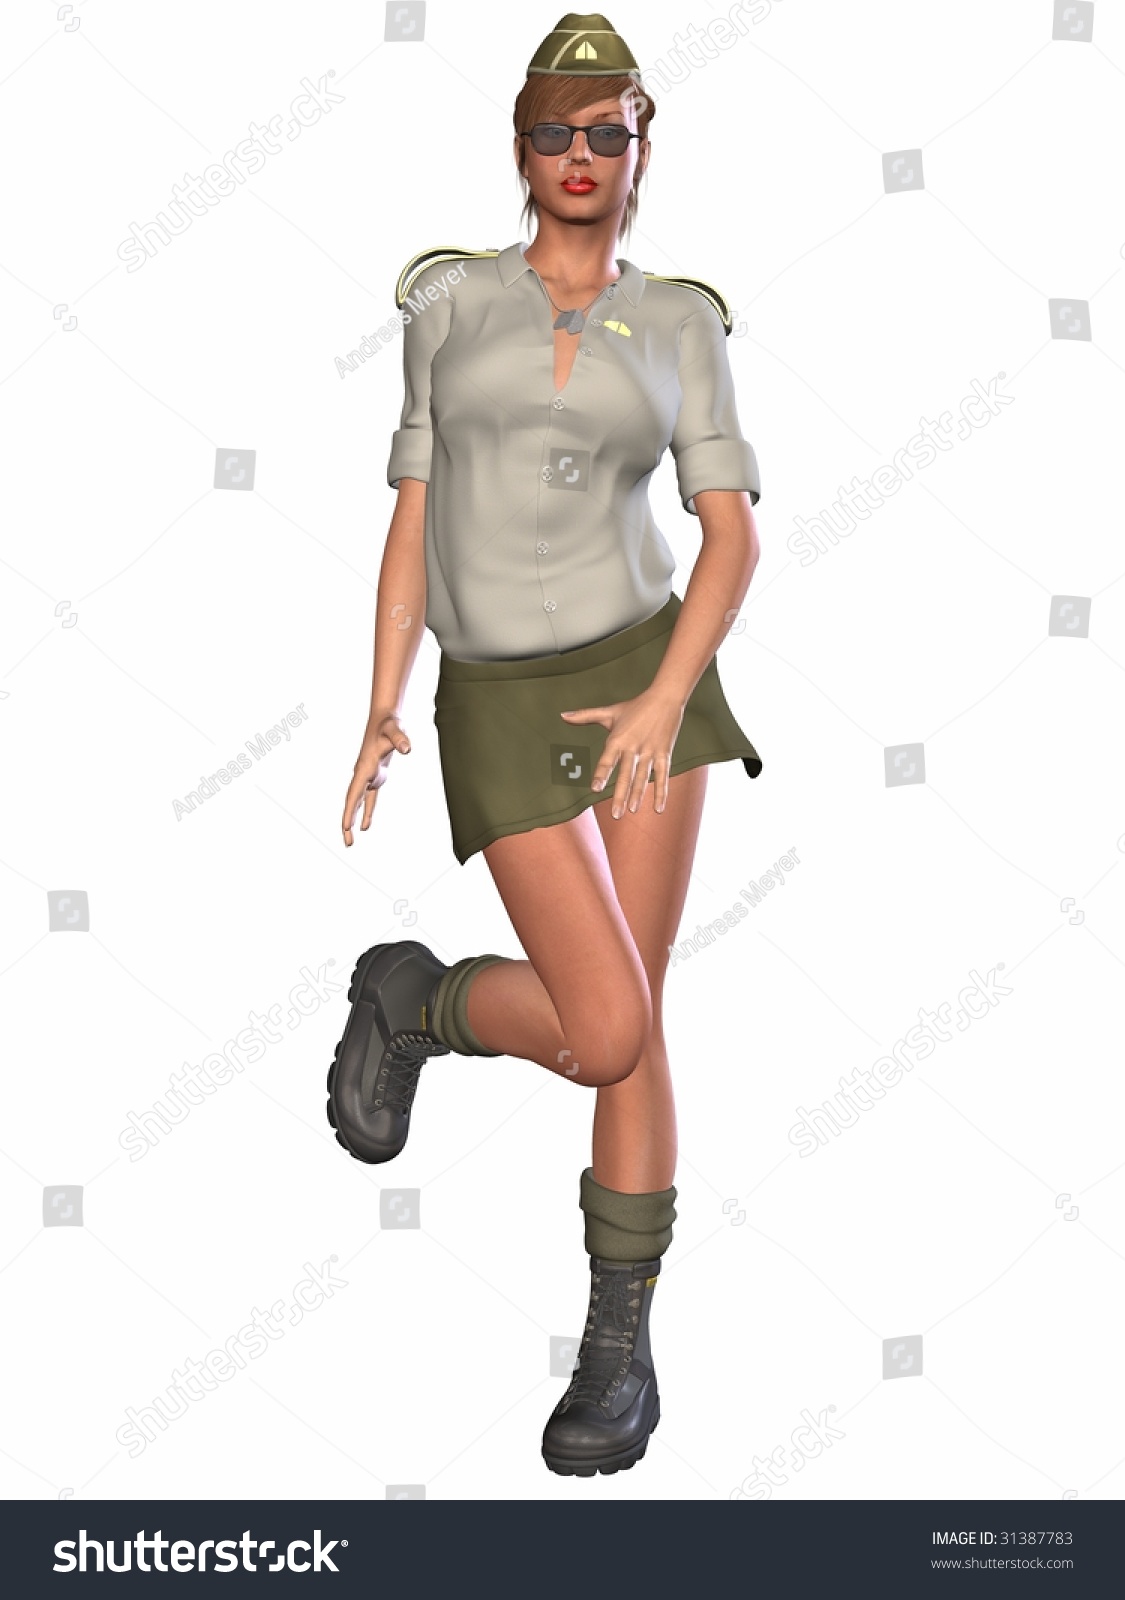 Army Pinup Girl Stock Illustration 31387783 Shutterstock 2851